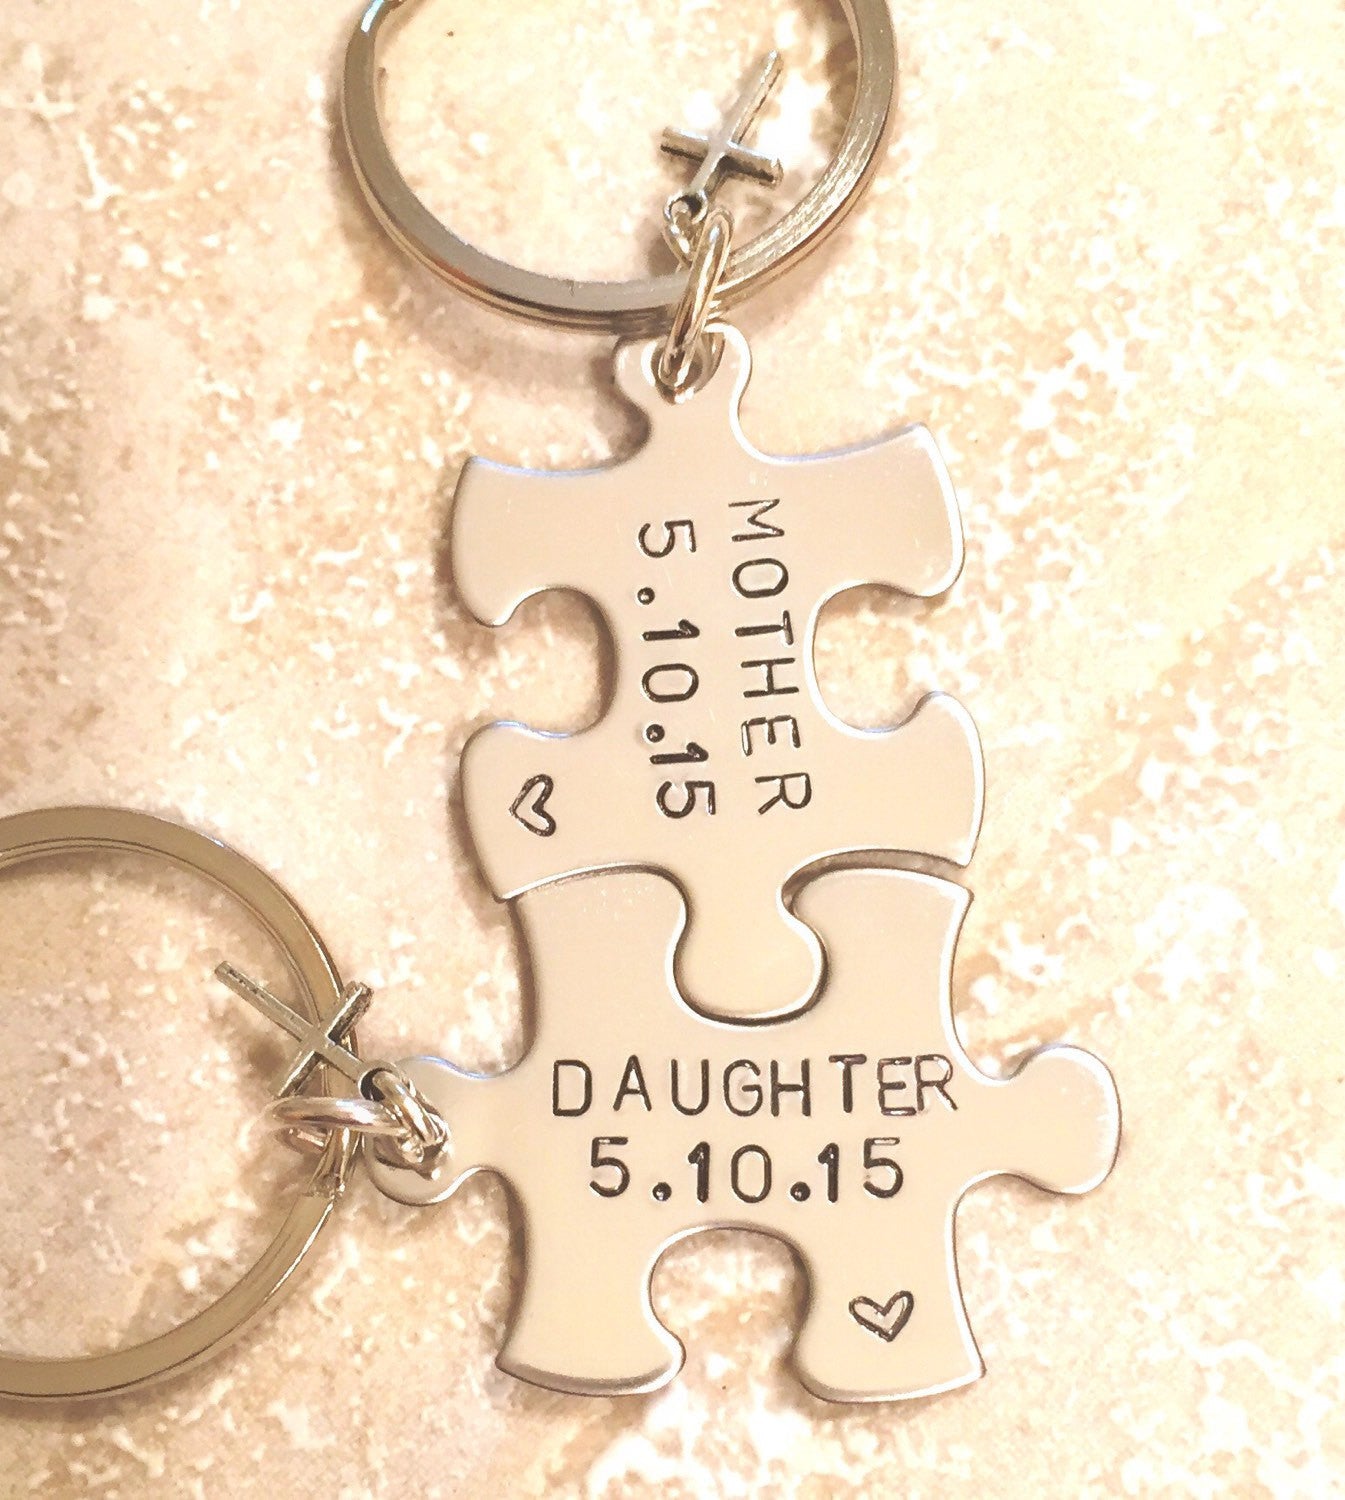 Mother Daughter Gifts-, Mother Daughter Keychain-, Valentine Mother Daughter, Mother's Day Gift -, Personalized Keychains-, natashaaloha - Natashaaloha, jewelry, bracelets, necklace, keychains, fishing lures, gifts for men, charms, personalized, 